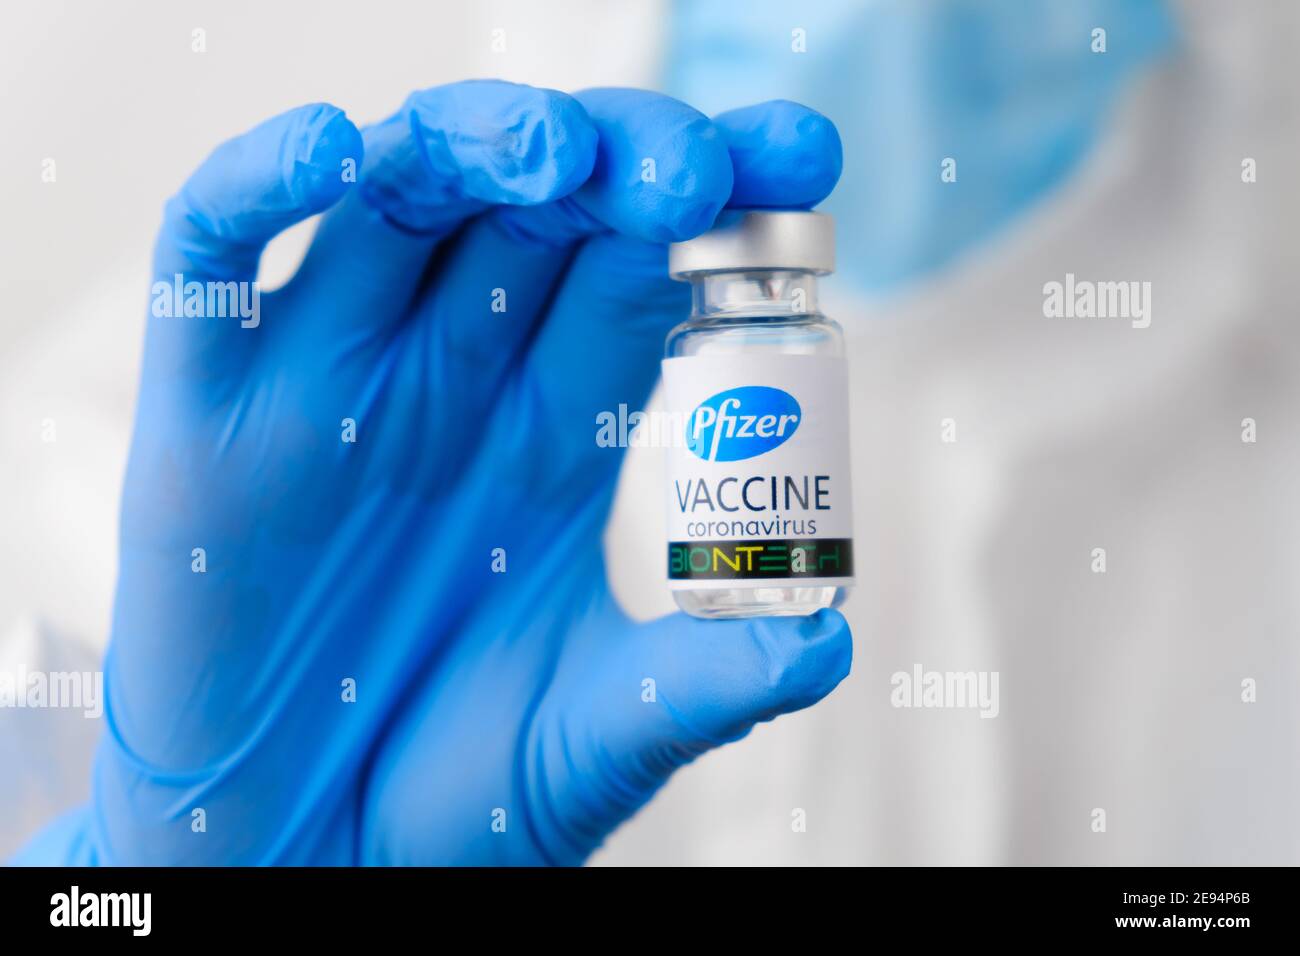 Pfizer coronavirus vaccine in doctors or nurses hands in blue rubber gloves. Prevention of sars-cov-2 or Covid-19, January 2021, San Francisco, USA. Stock Photo